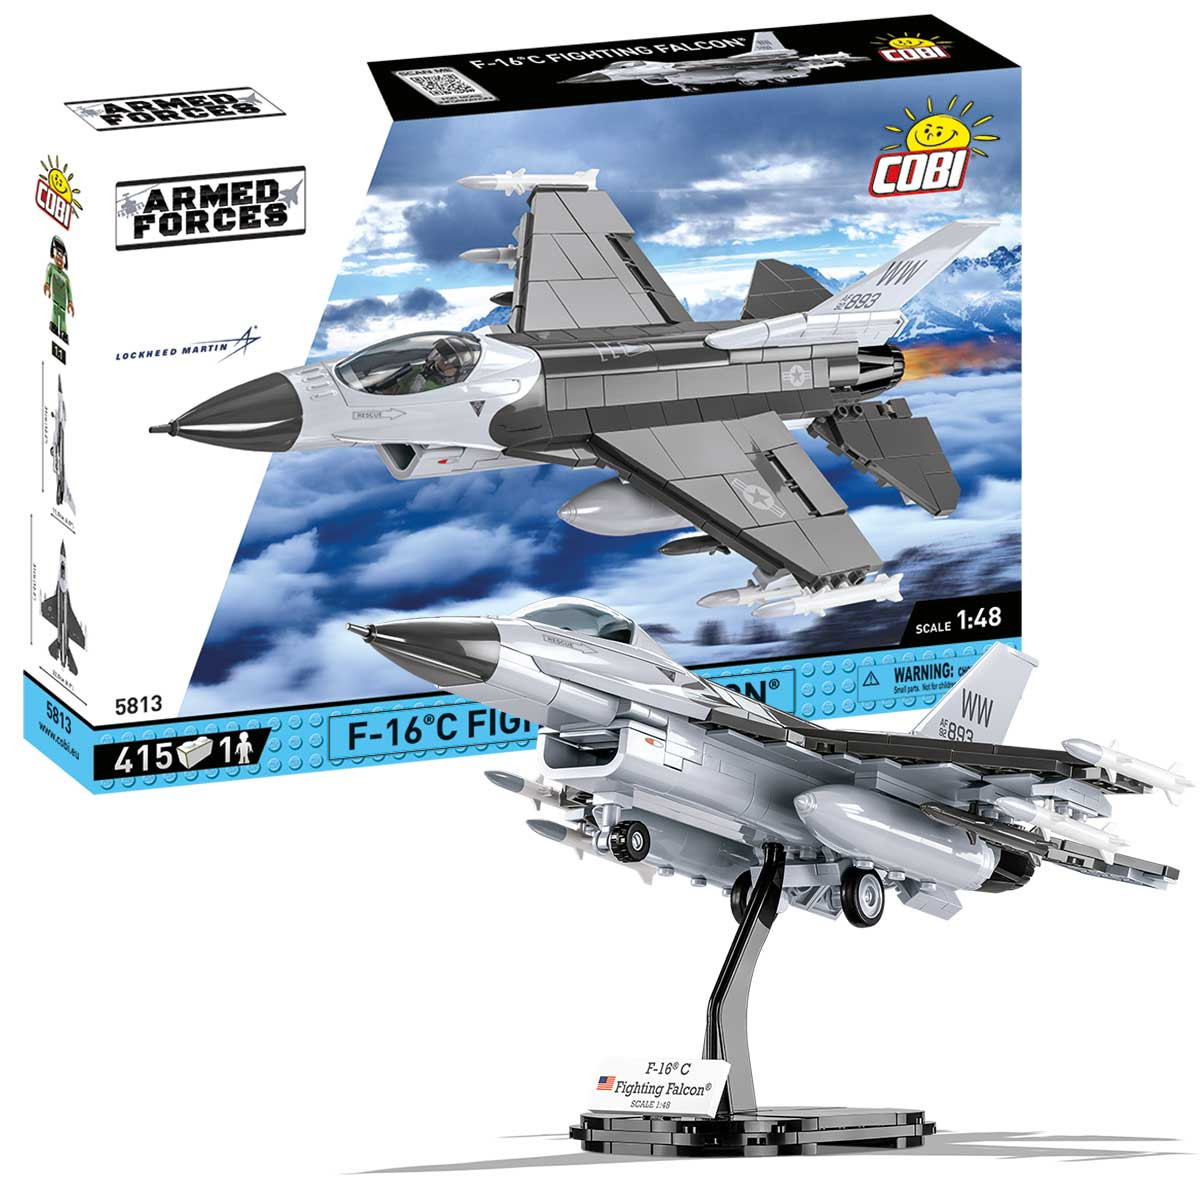 Cobi Armed Forces F-16 Fighting Falcon 415pcs 1:48